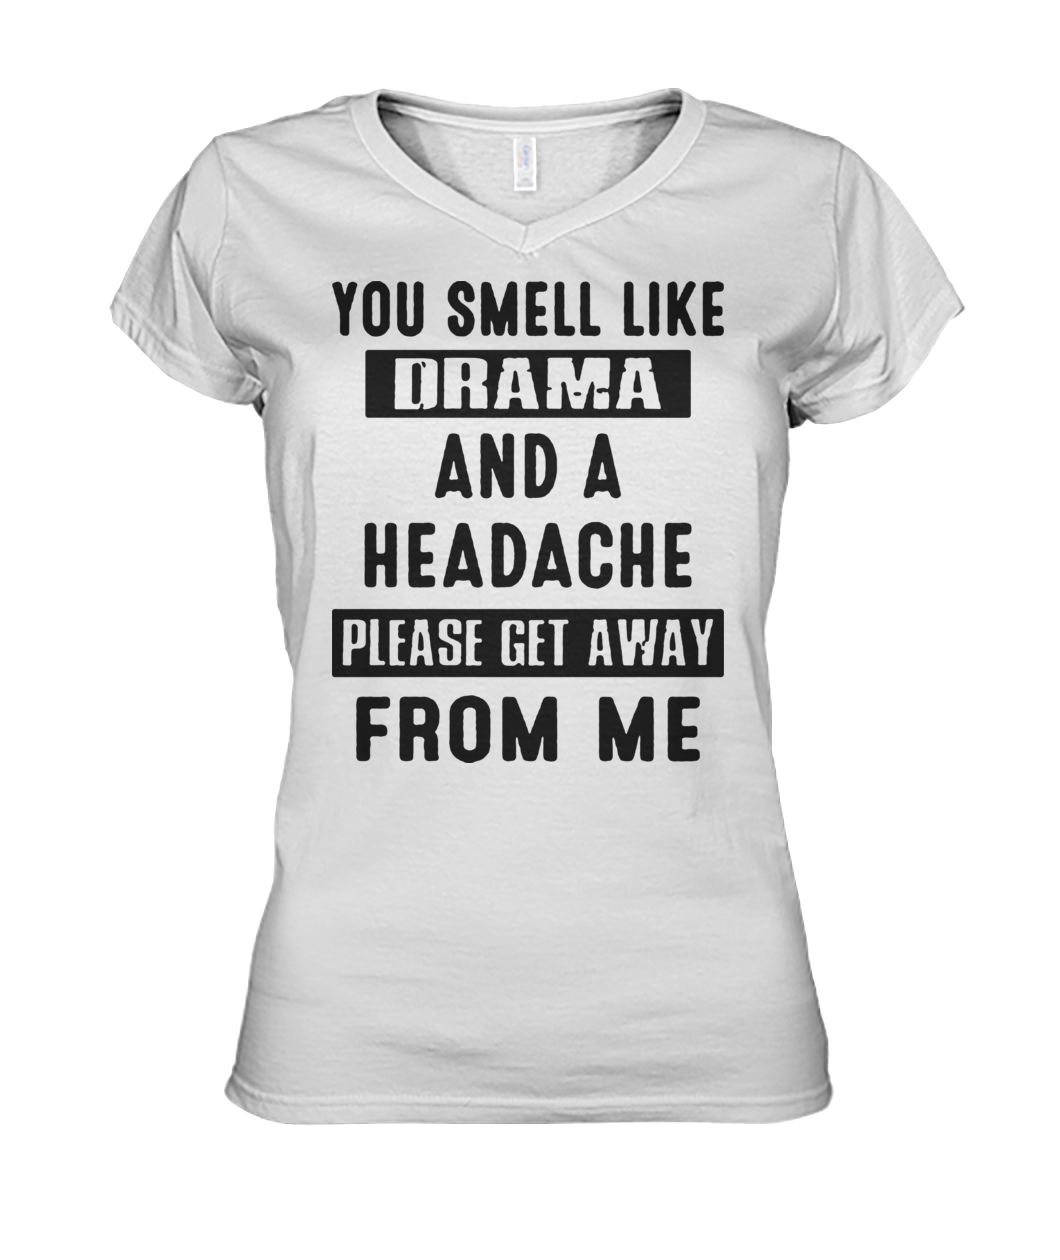 You smell like drama and a headache please get away from me women's v-neck